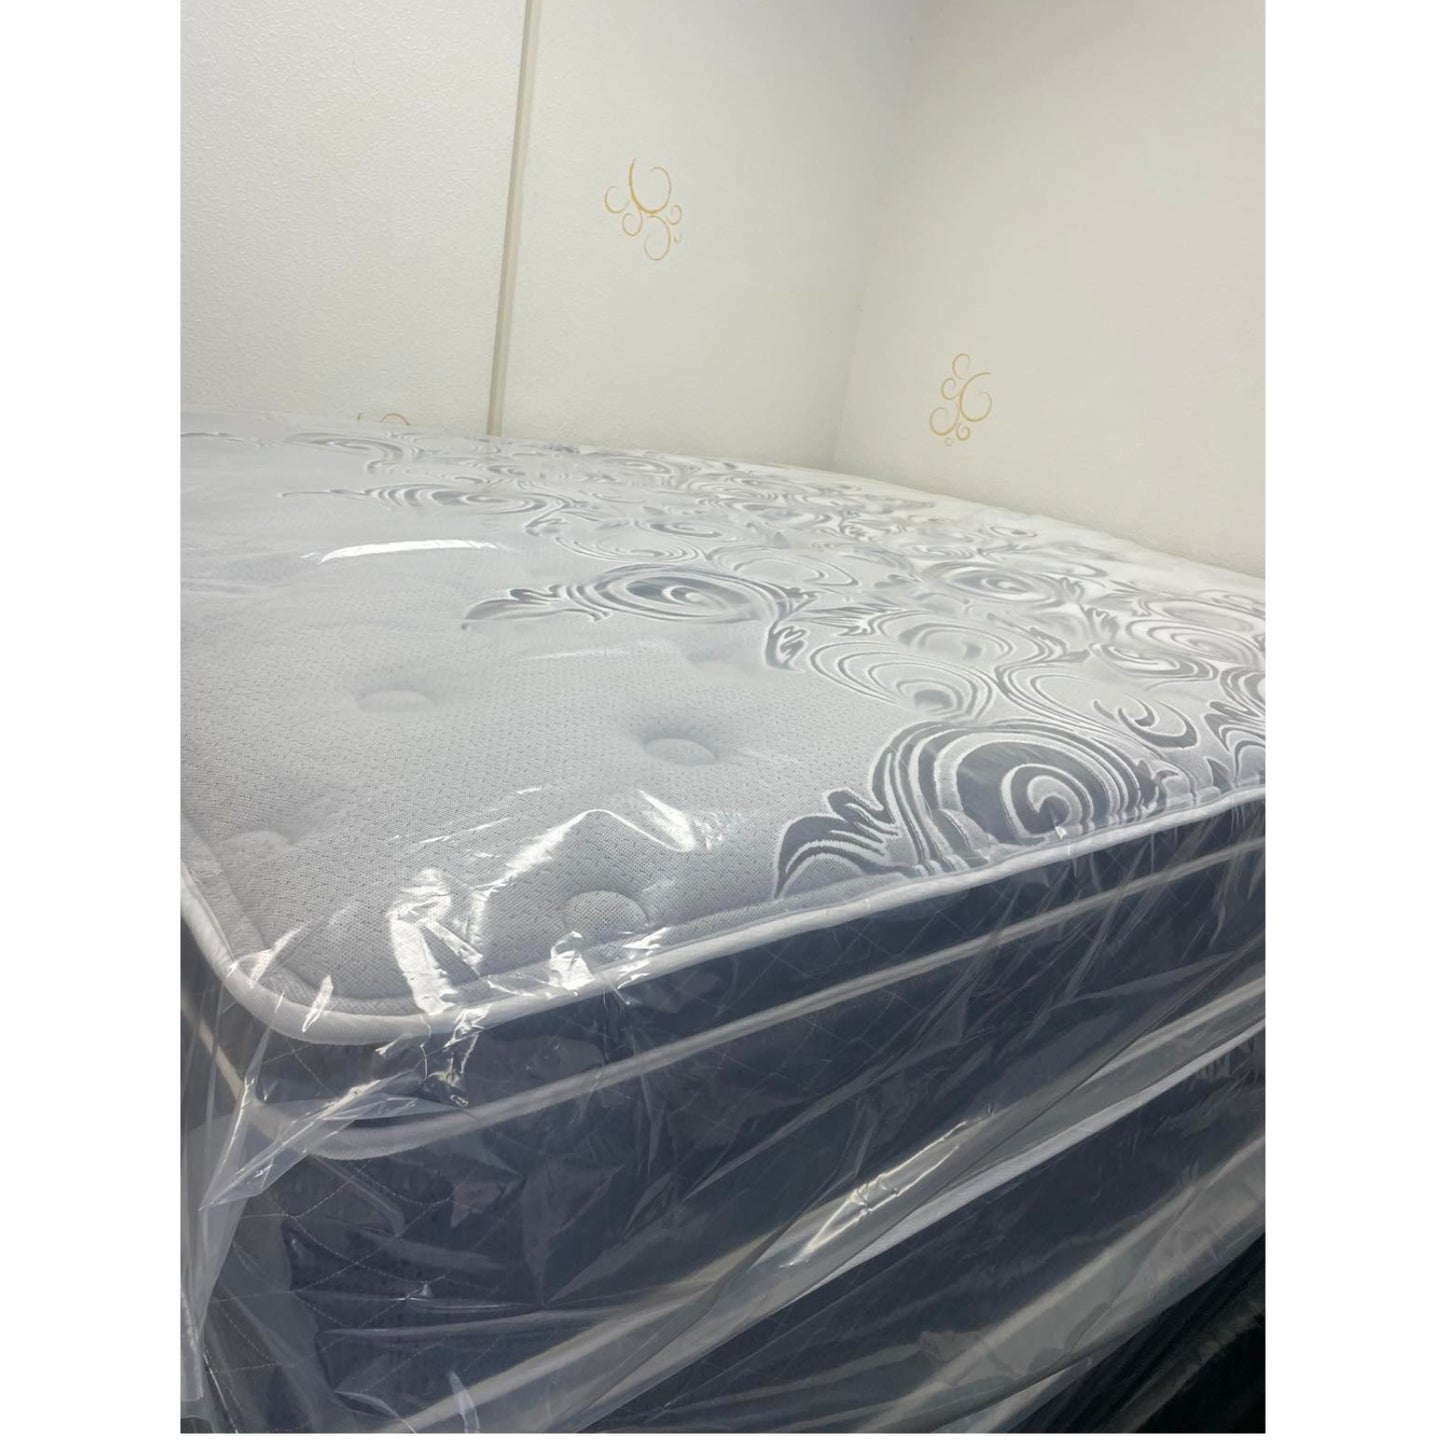 Vivians 13" Innerspring Mattress With Gray Quilt, Inside Of A Showroom, Stacked On Top Of Other Mattresses, Zoomed In